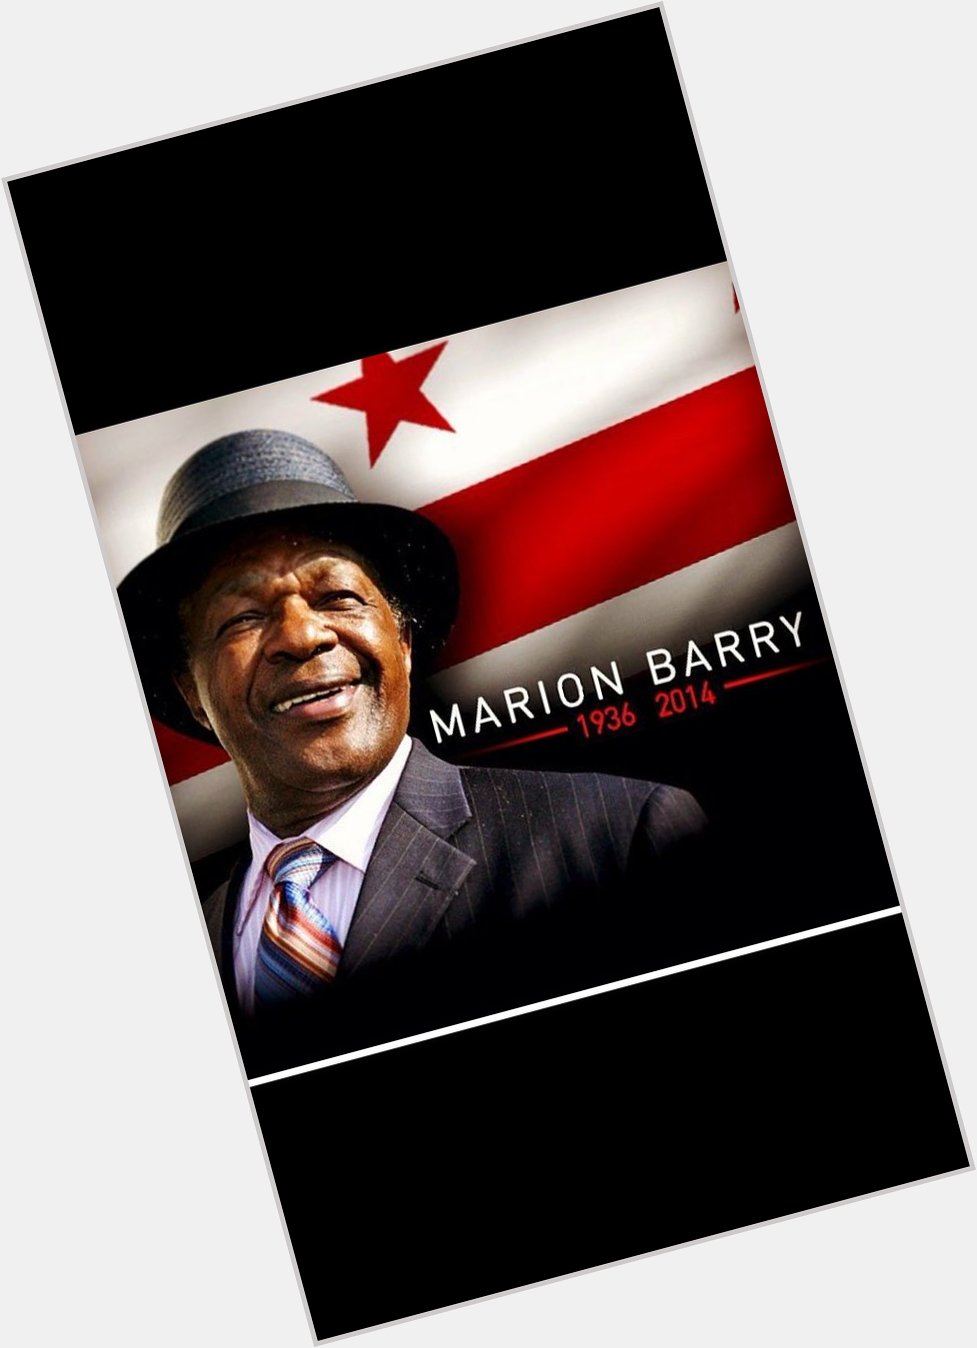 Happy Birthday to the Honorable Marion Barry! Rest well sir. 